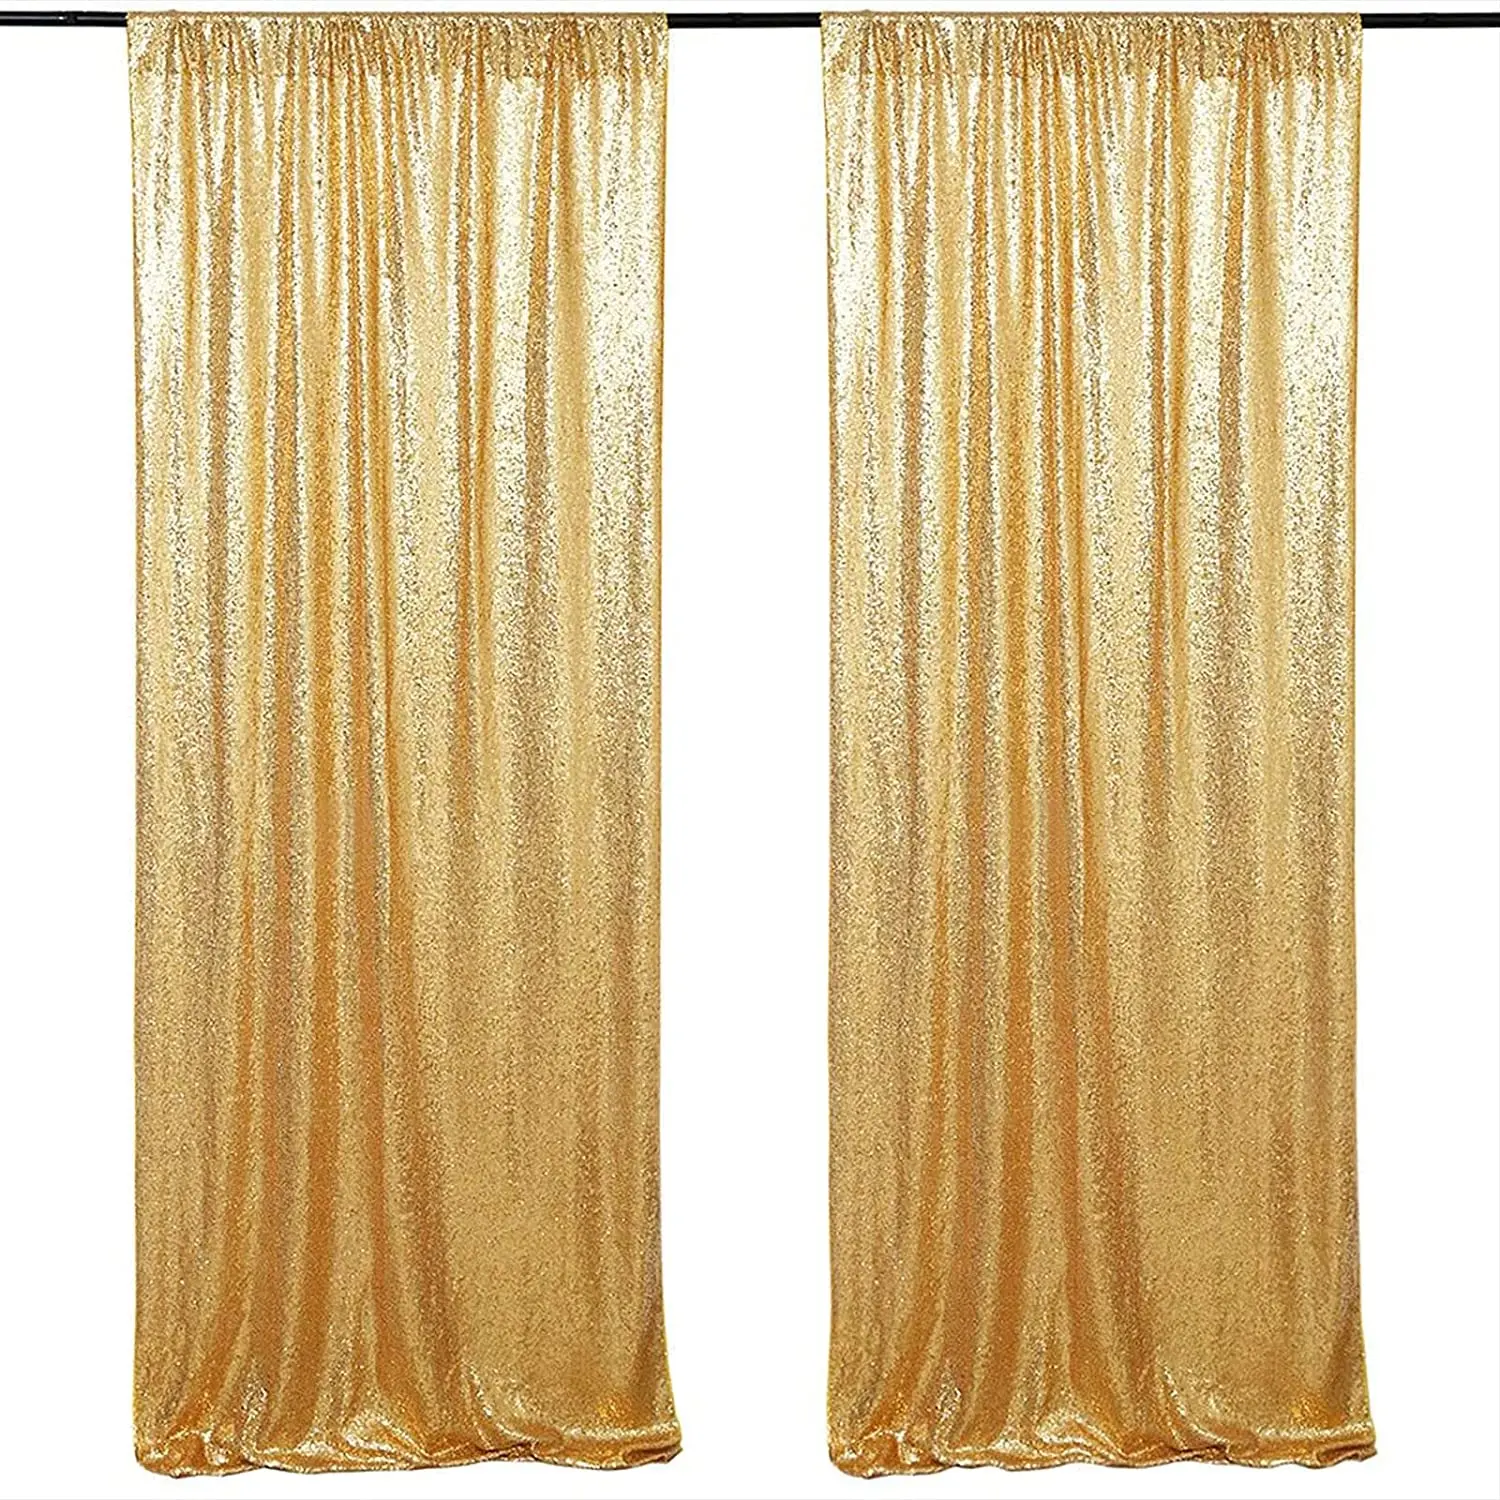 Weekly Deal Sequin Glitter Gold Backdrop Curtain Drape For Wedding Decoration